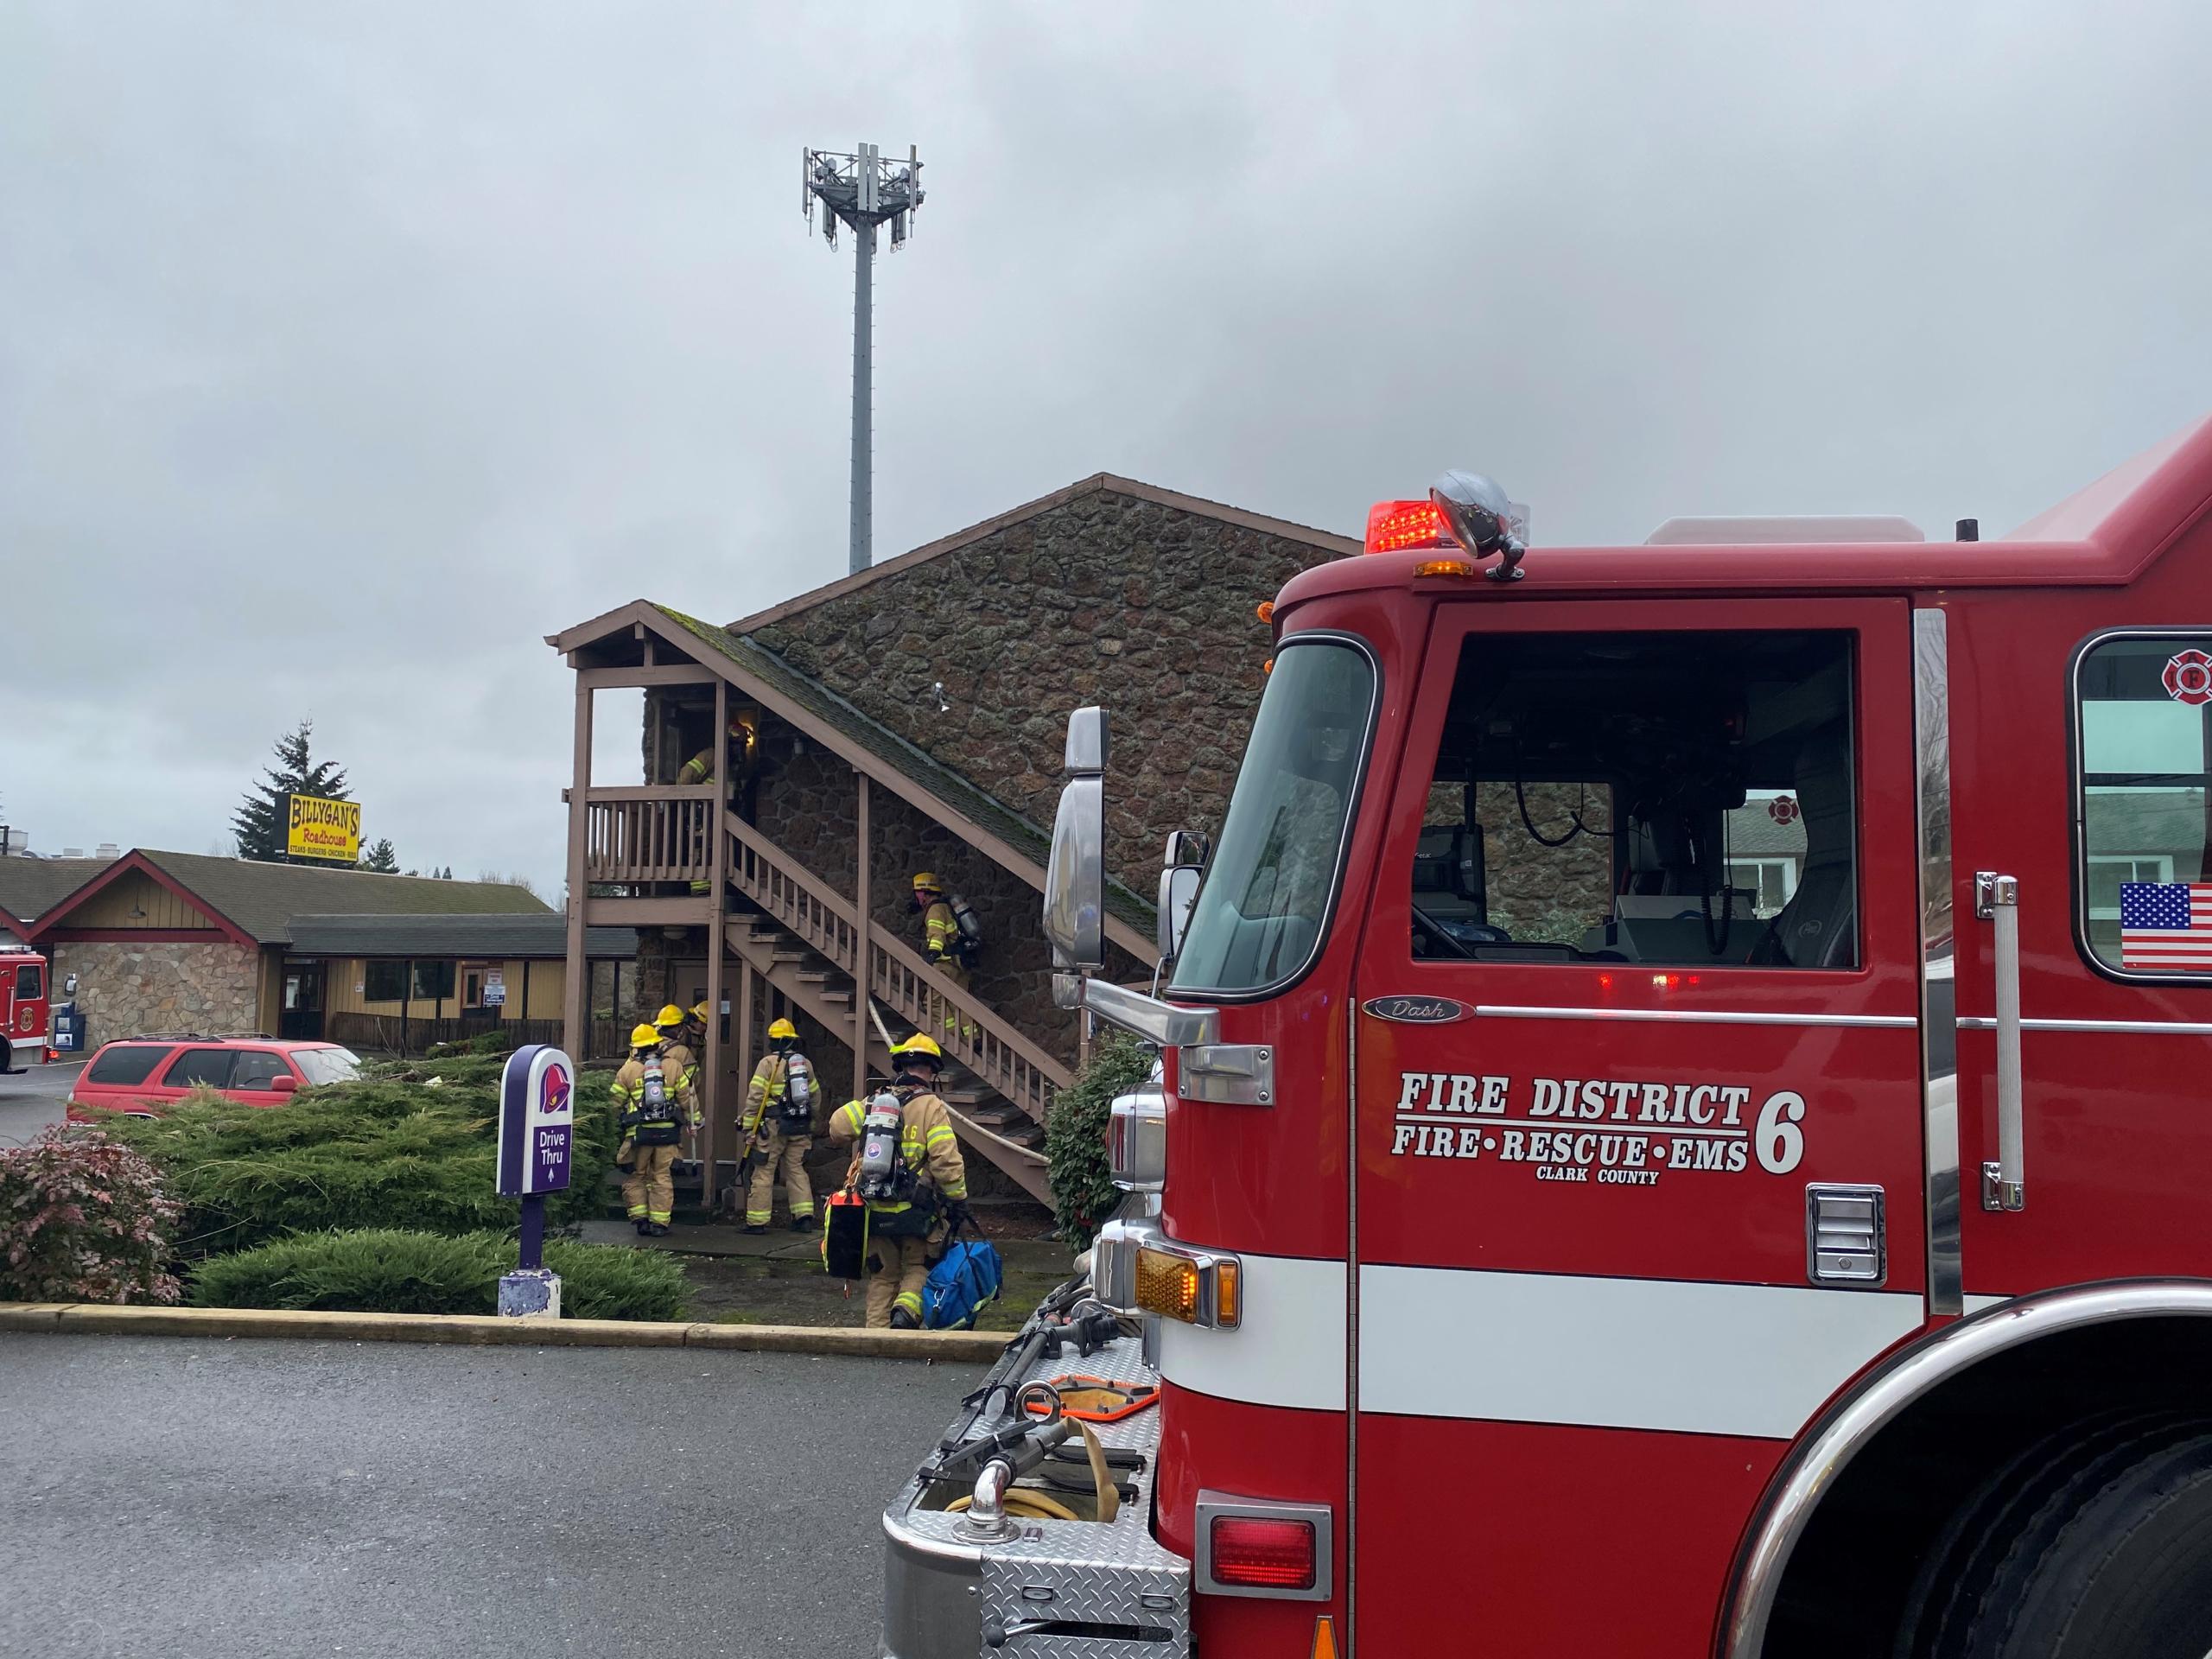 Firefighters quickly extinguished a blaze Monday morning in Salmon Creek. Clark County Fire District 6 crews were initially dispatched for a medical call at 10:47 a.m. to Red Lion & Suites Vancouver, 13206 N.E. Highway 99. They found a working fire on the second story of the motel.